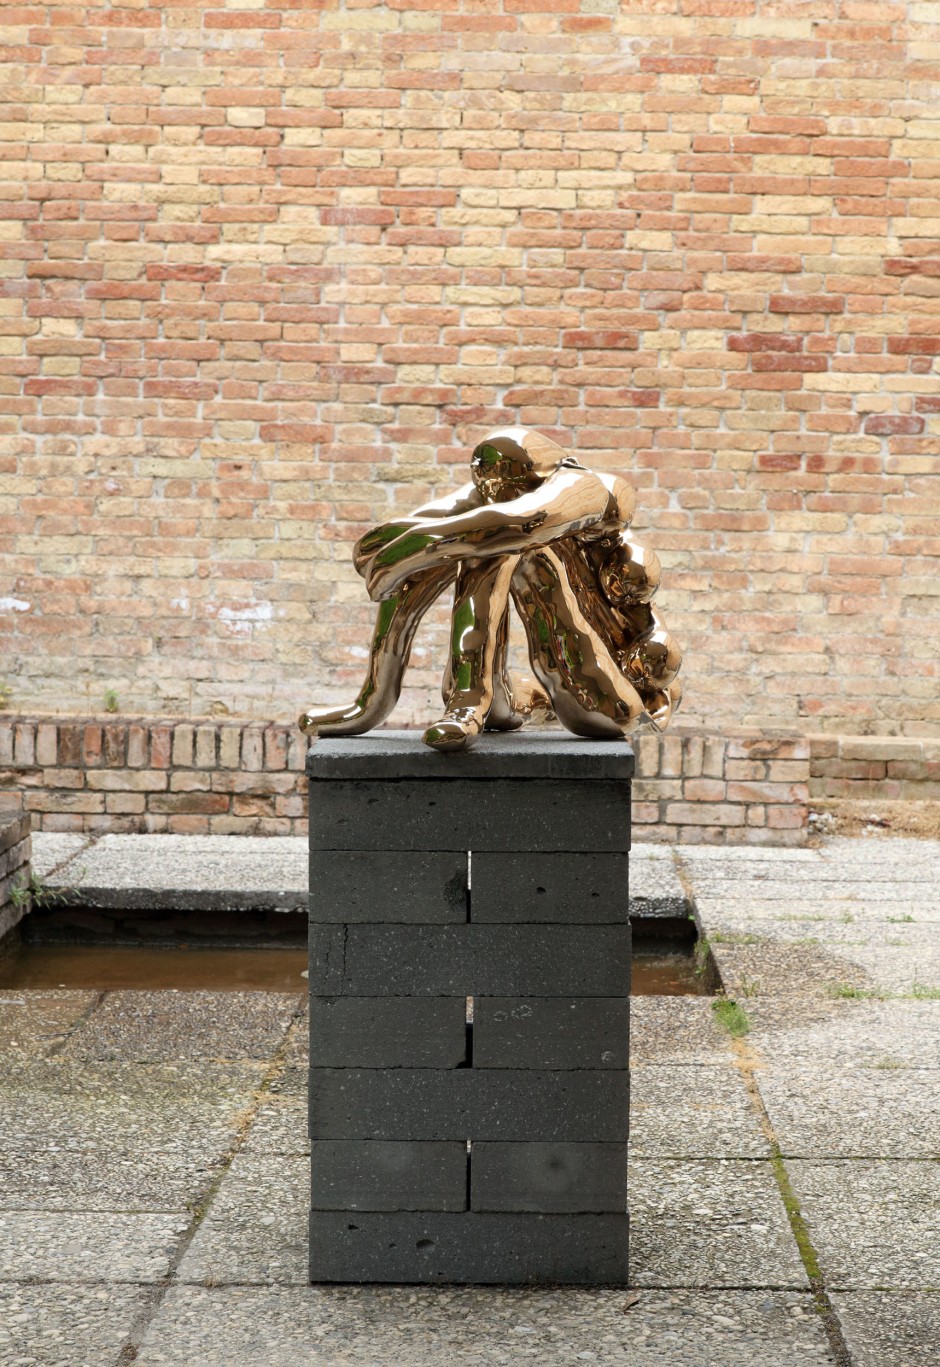 Realidad, 2013  stamped with engraved signature and editioned on base  cast bronze  44.0 x 43.0 x 57.0 cm 17 1/8 x 16 5/16 x 22 1/8 in.